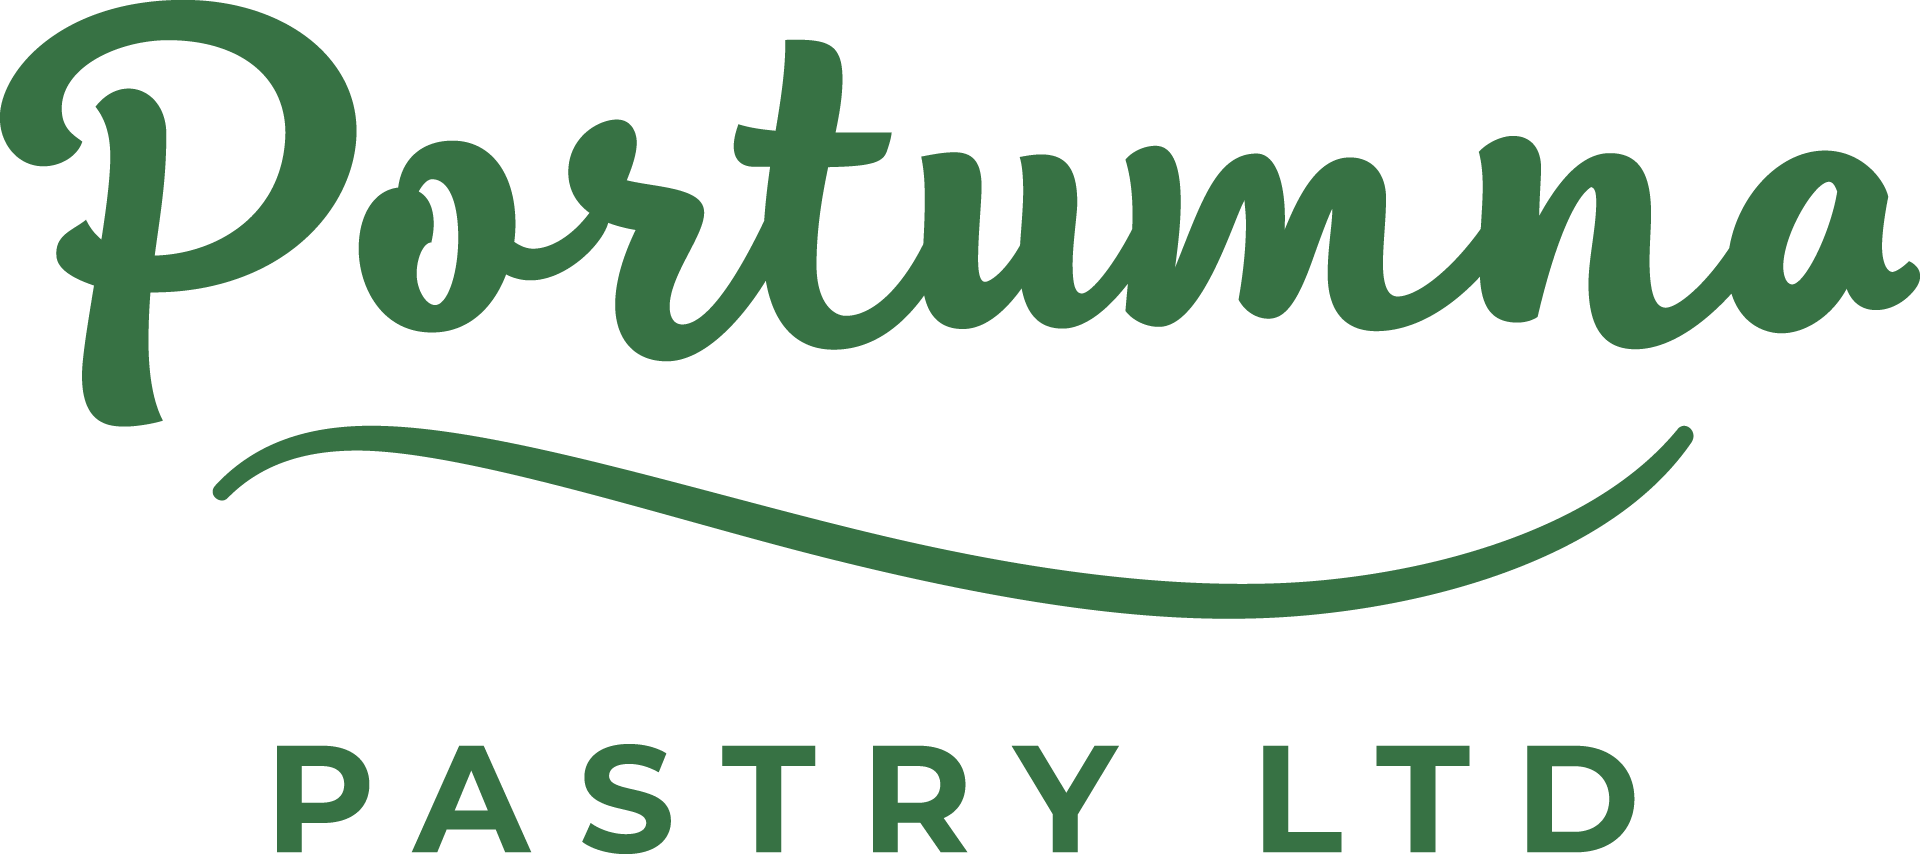 Image of Portumna Pastry Limited logotype